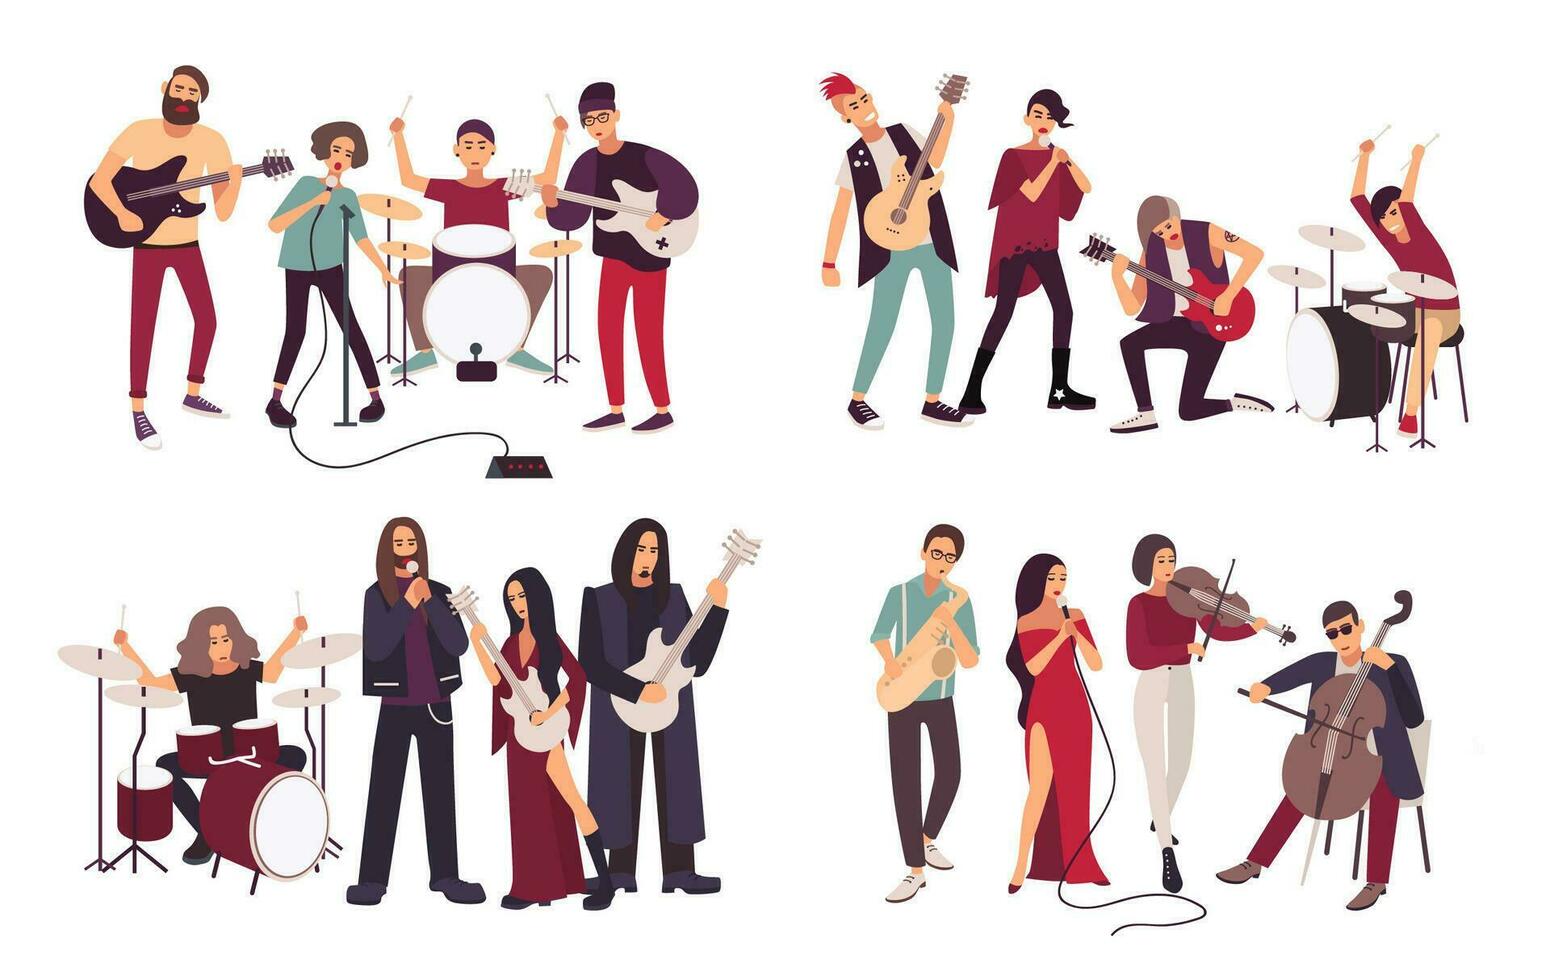 Different musical bands. Indie, metal, punk rock, jazz, cabaret. Young artists, musicians singing and playing music instruments. Colorful flat illustration set. vector